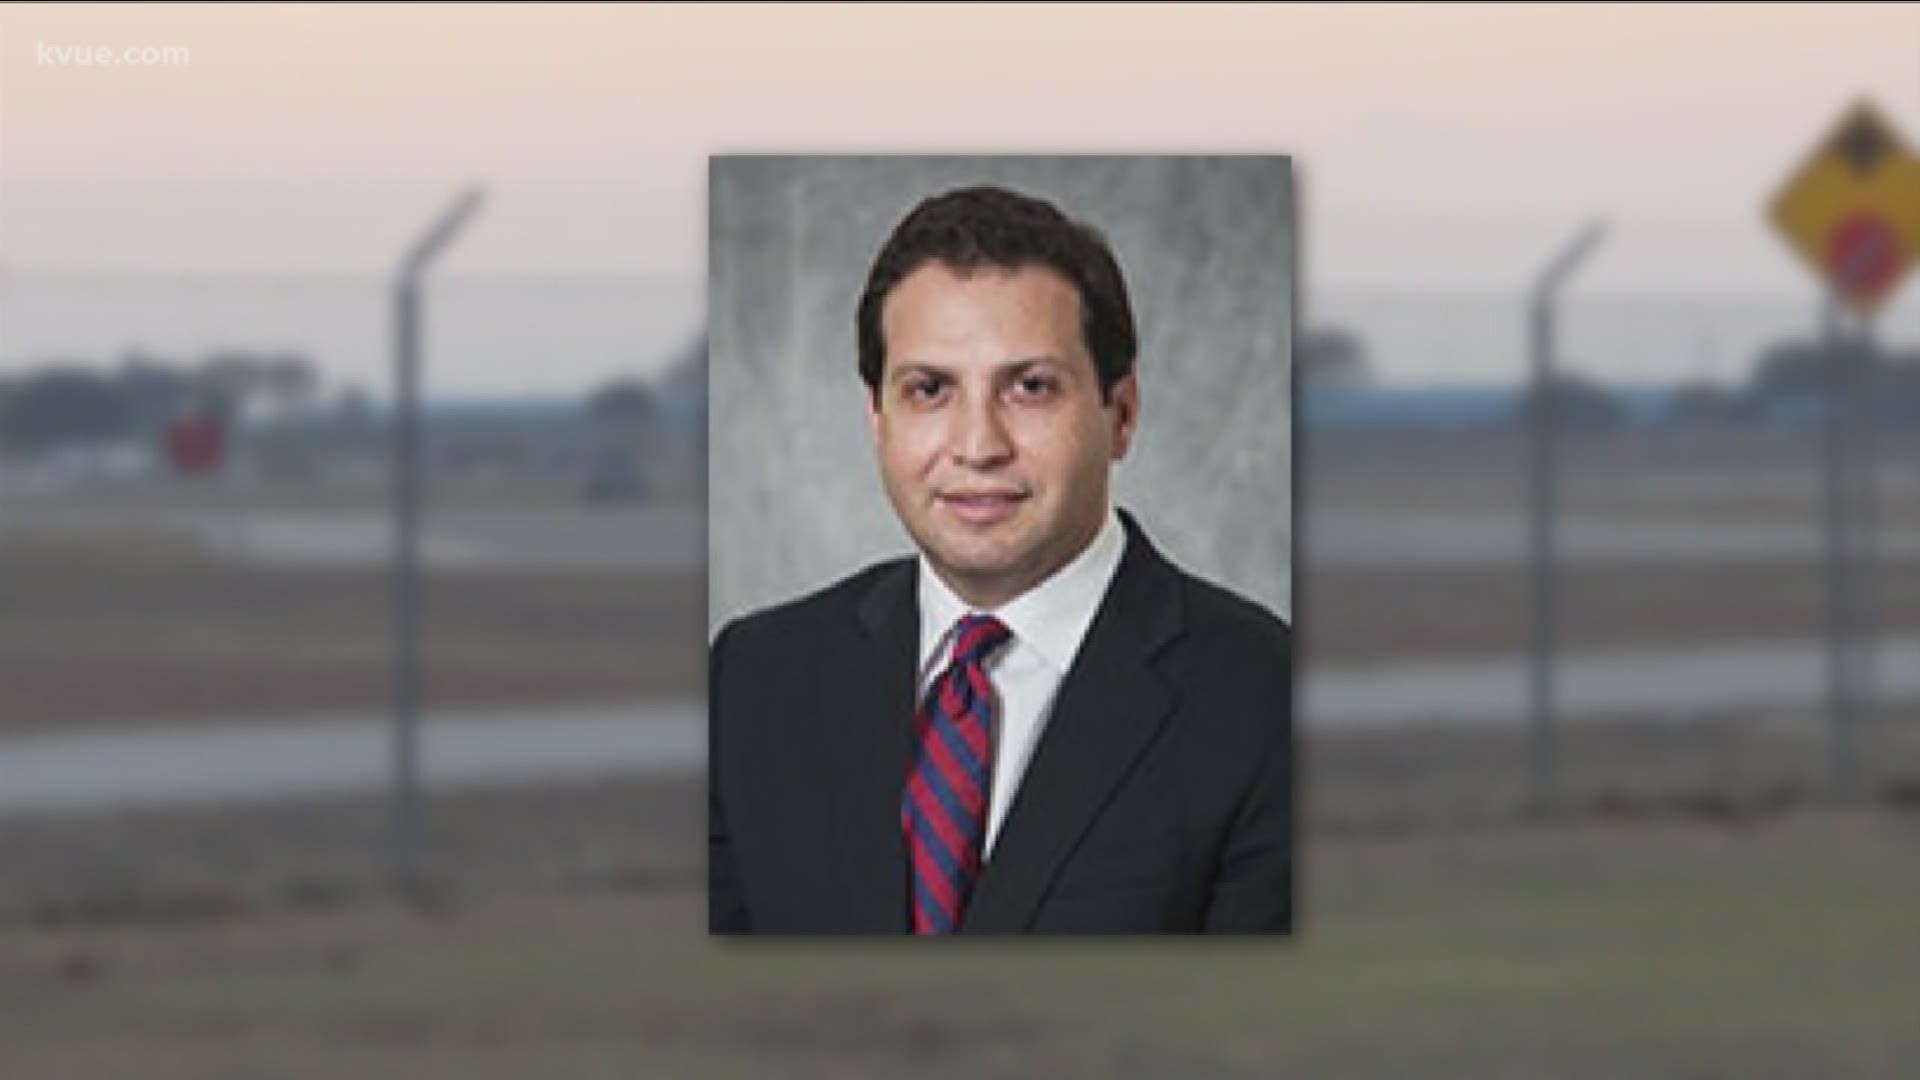 A Texas state lawmaker is in trouble after troopers say surveillance video showed him dropping an envelope with bags of cocaine inside.